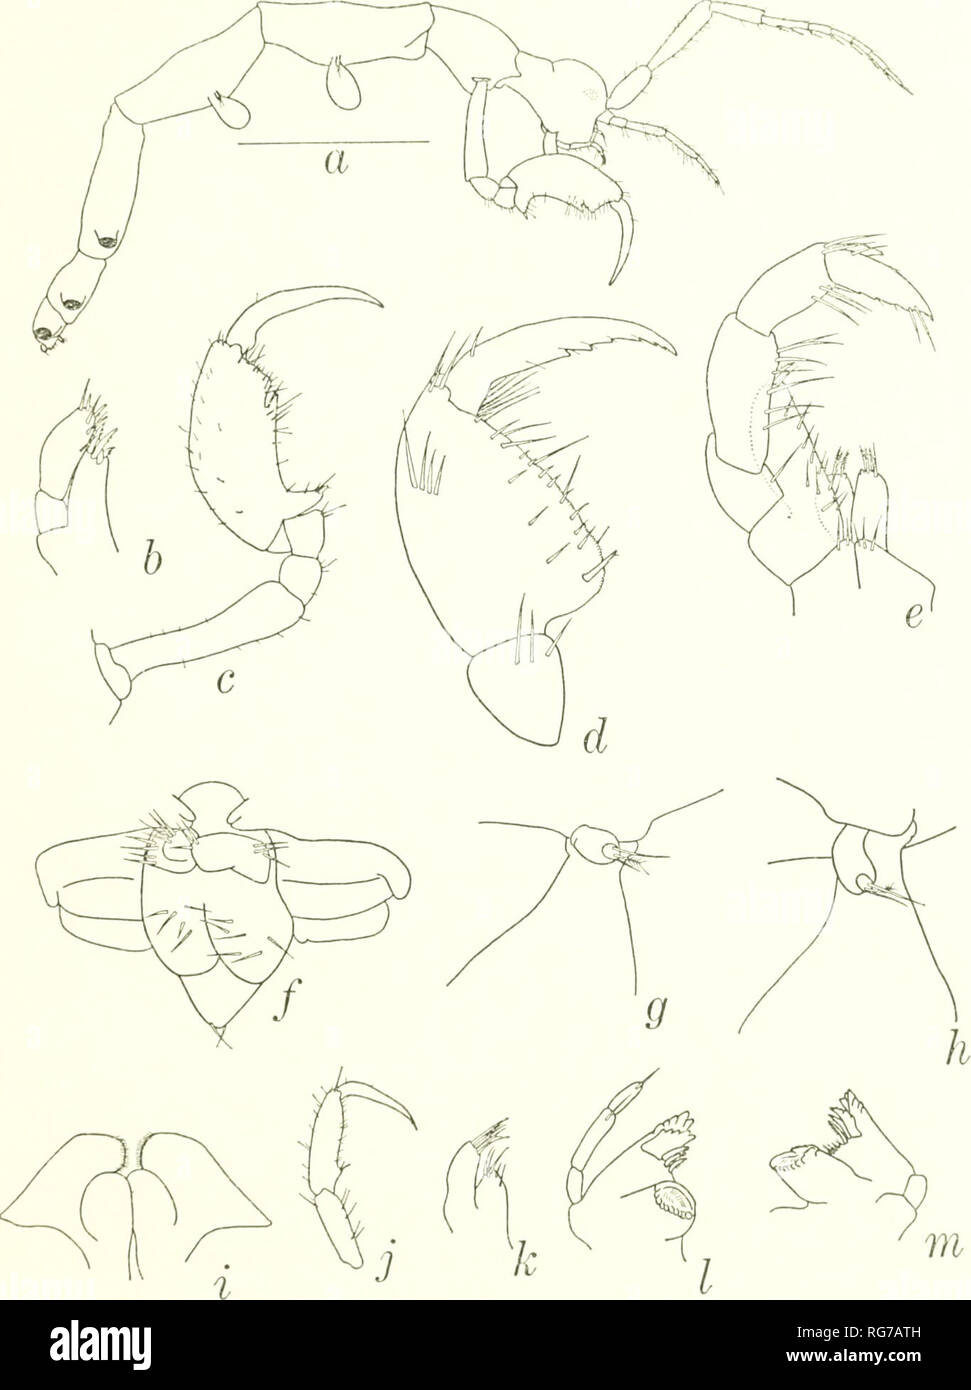 . Bulletin - United States National Museum. Science. CAPRELLIDAE OF WESTERN NORTH ATLANTIC 55. Figure 25.—Deutella mayeri, male; a, lateral view; h, maxilla 1; c, gnathopod 2; d, gnalho- pod 1; e, maxilllped;/, abdomen; g, pereopod 4; h, pcreopod 3; i, labium; ;, pereopod 5; k, maxilla 1; /, left mandible; m, right mandible. Outer lobe of maxilliped with 2 apical setae, 1 plumose and 1 non- plumose seta, and several medial setae; inner lobe with 3 or 4 apical setae of which 2 or 3 plumose; terminal article of palp with 2 or 3 distal setae, penultimate article with distal triangular projection. Stock Photo